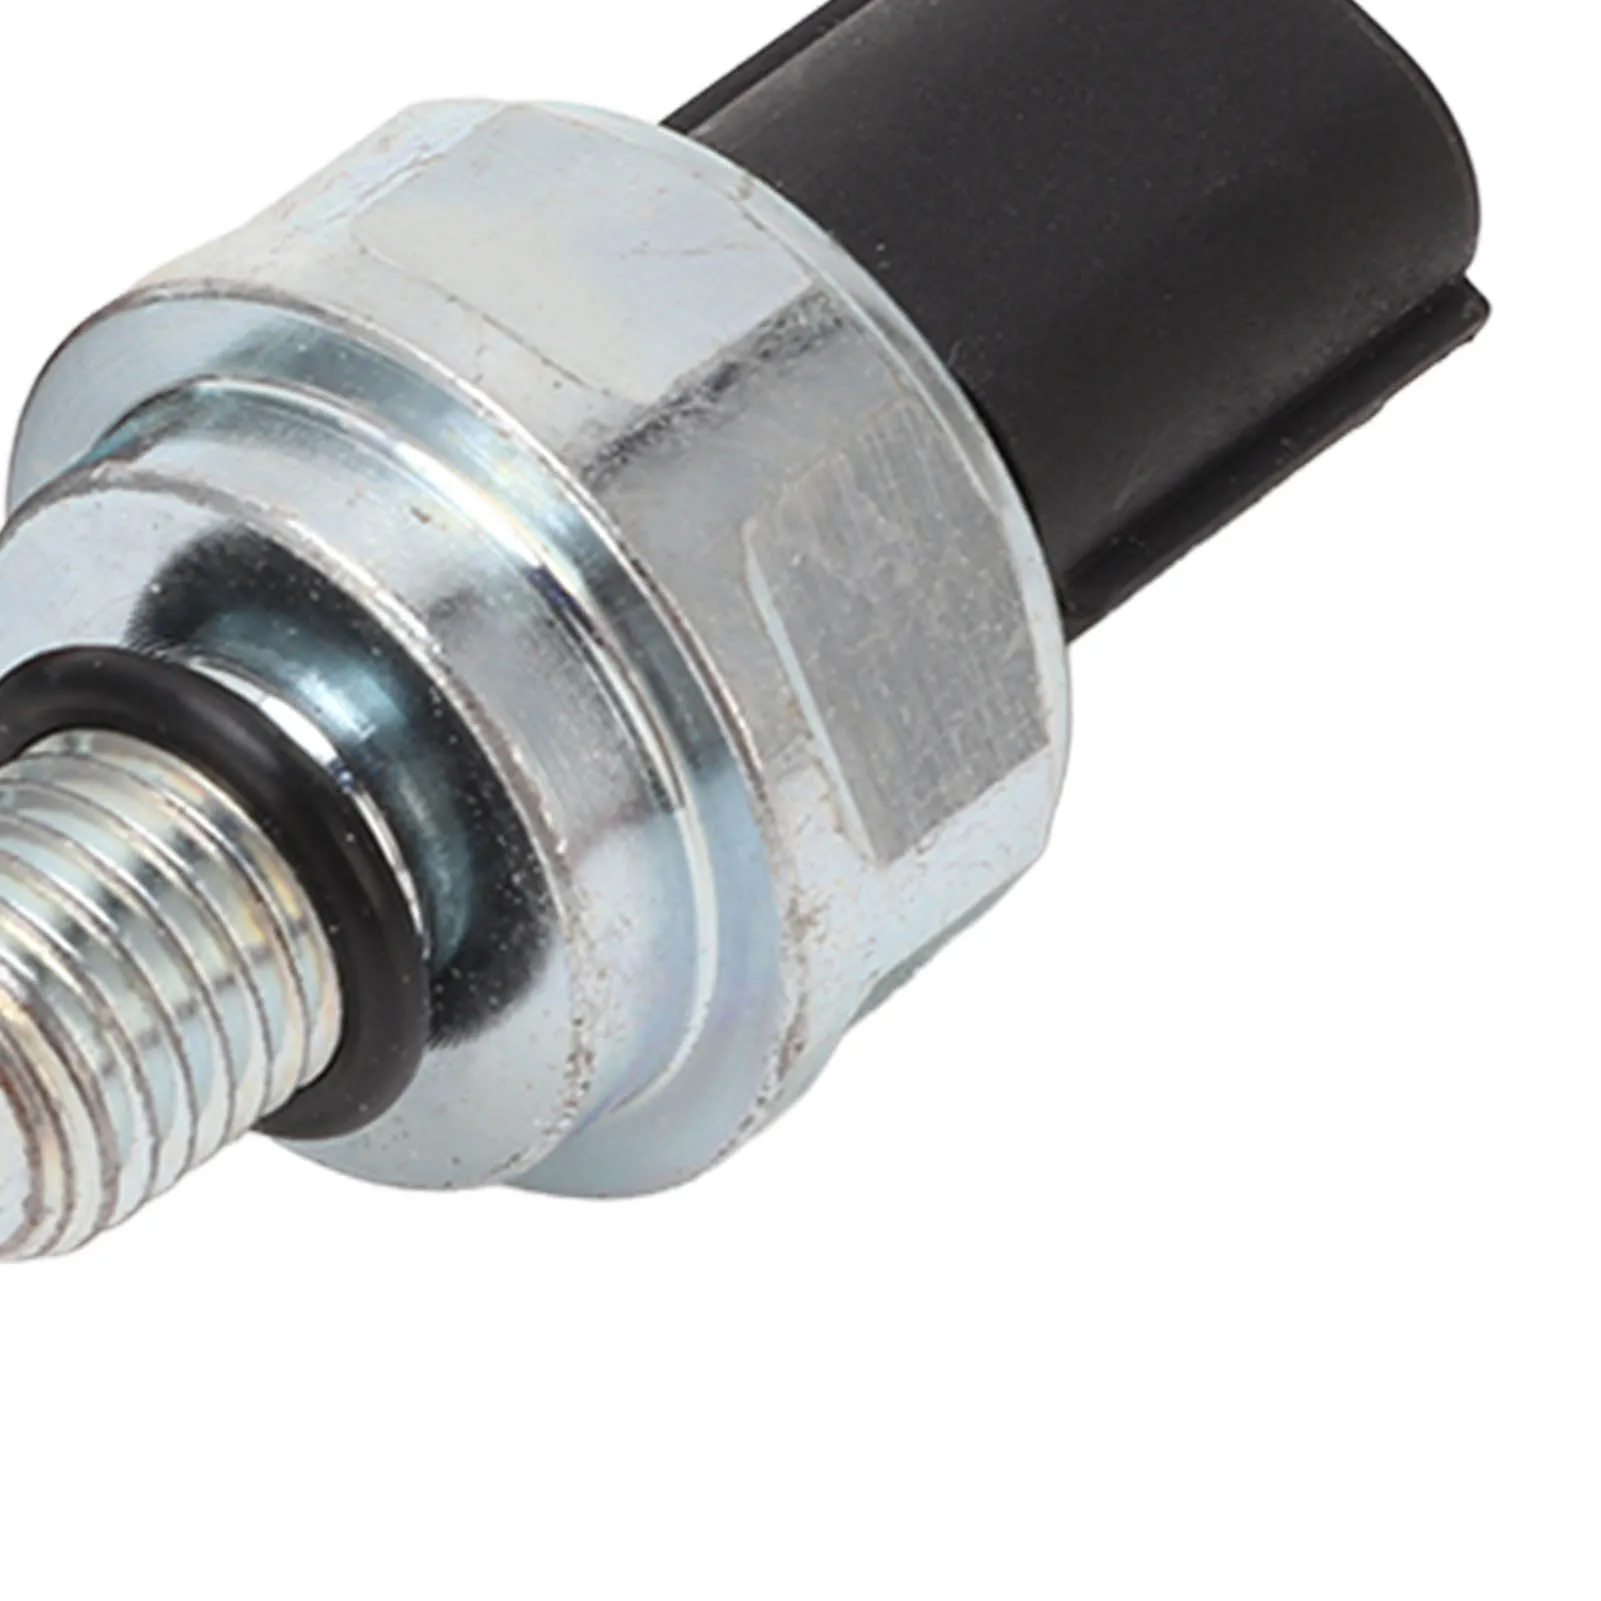 Transmission Pressure Switch High Sensitivity 28600 P7Z 003 for Acura MDX 2001 - £16.49 GBP